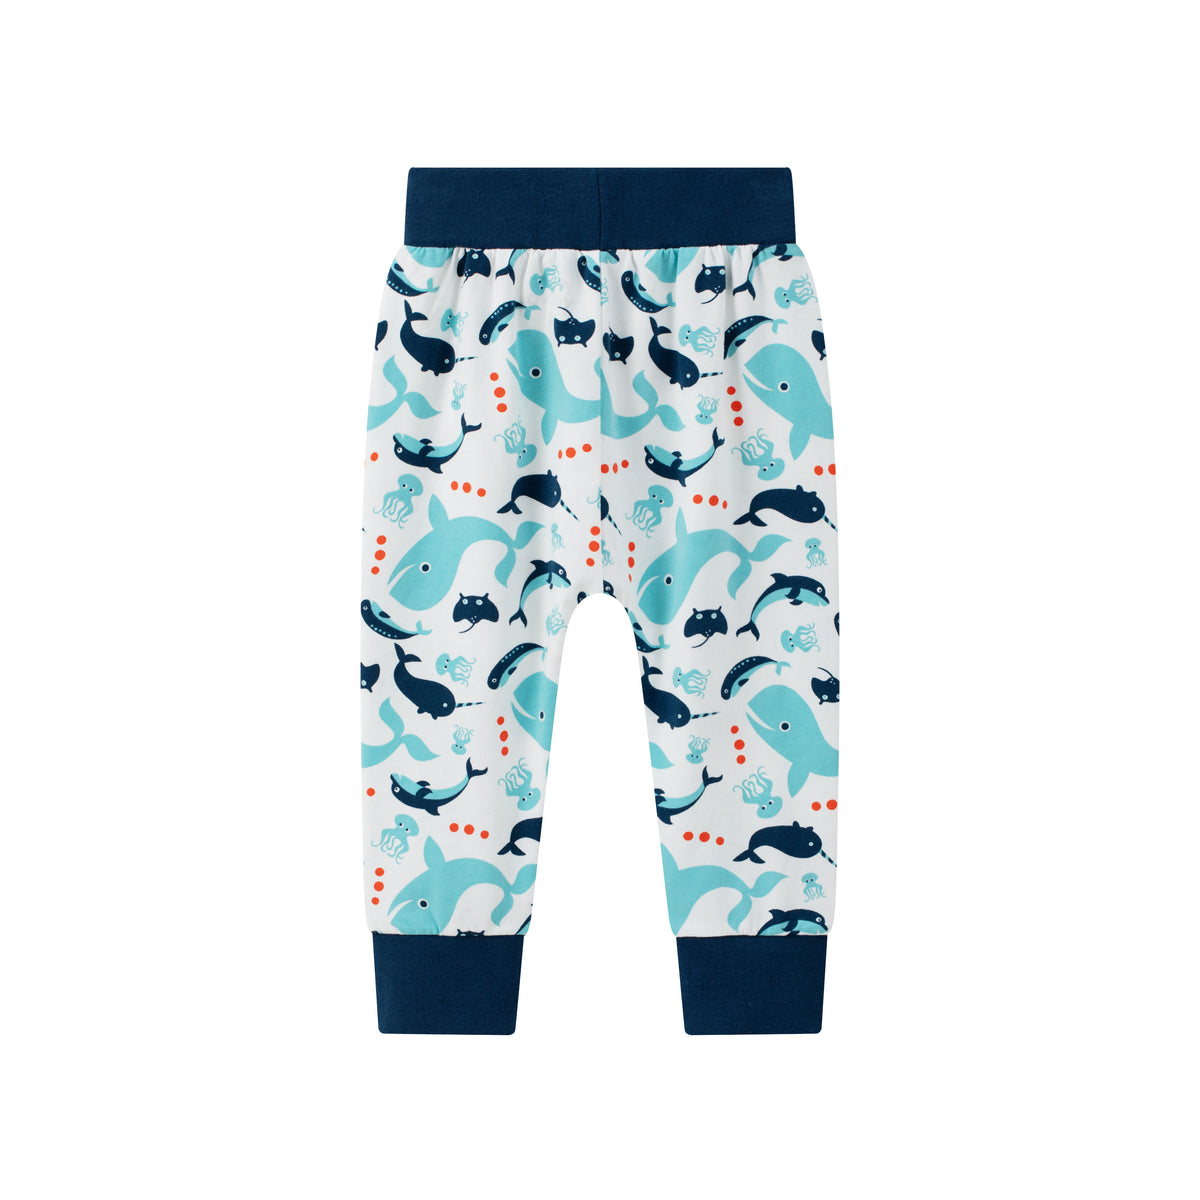 Vauva SS24 - Baby Boy Printed Pants (Blue) product image 01